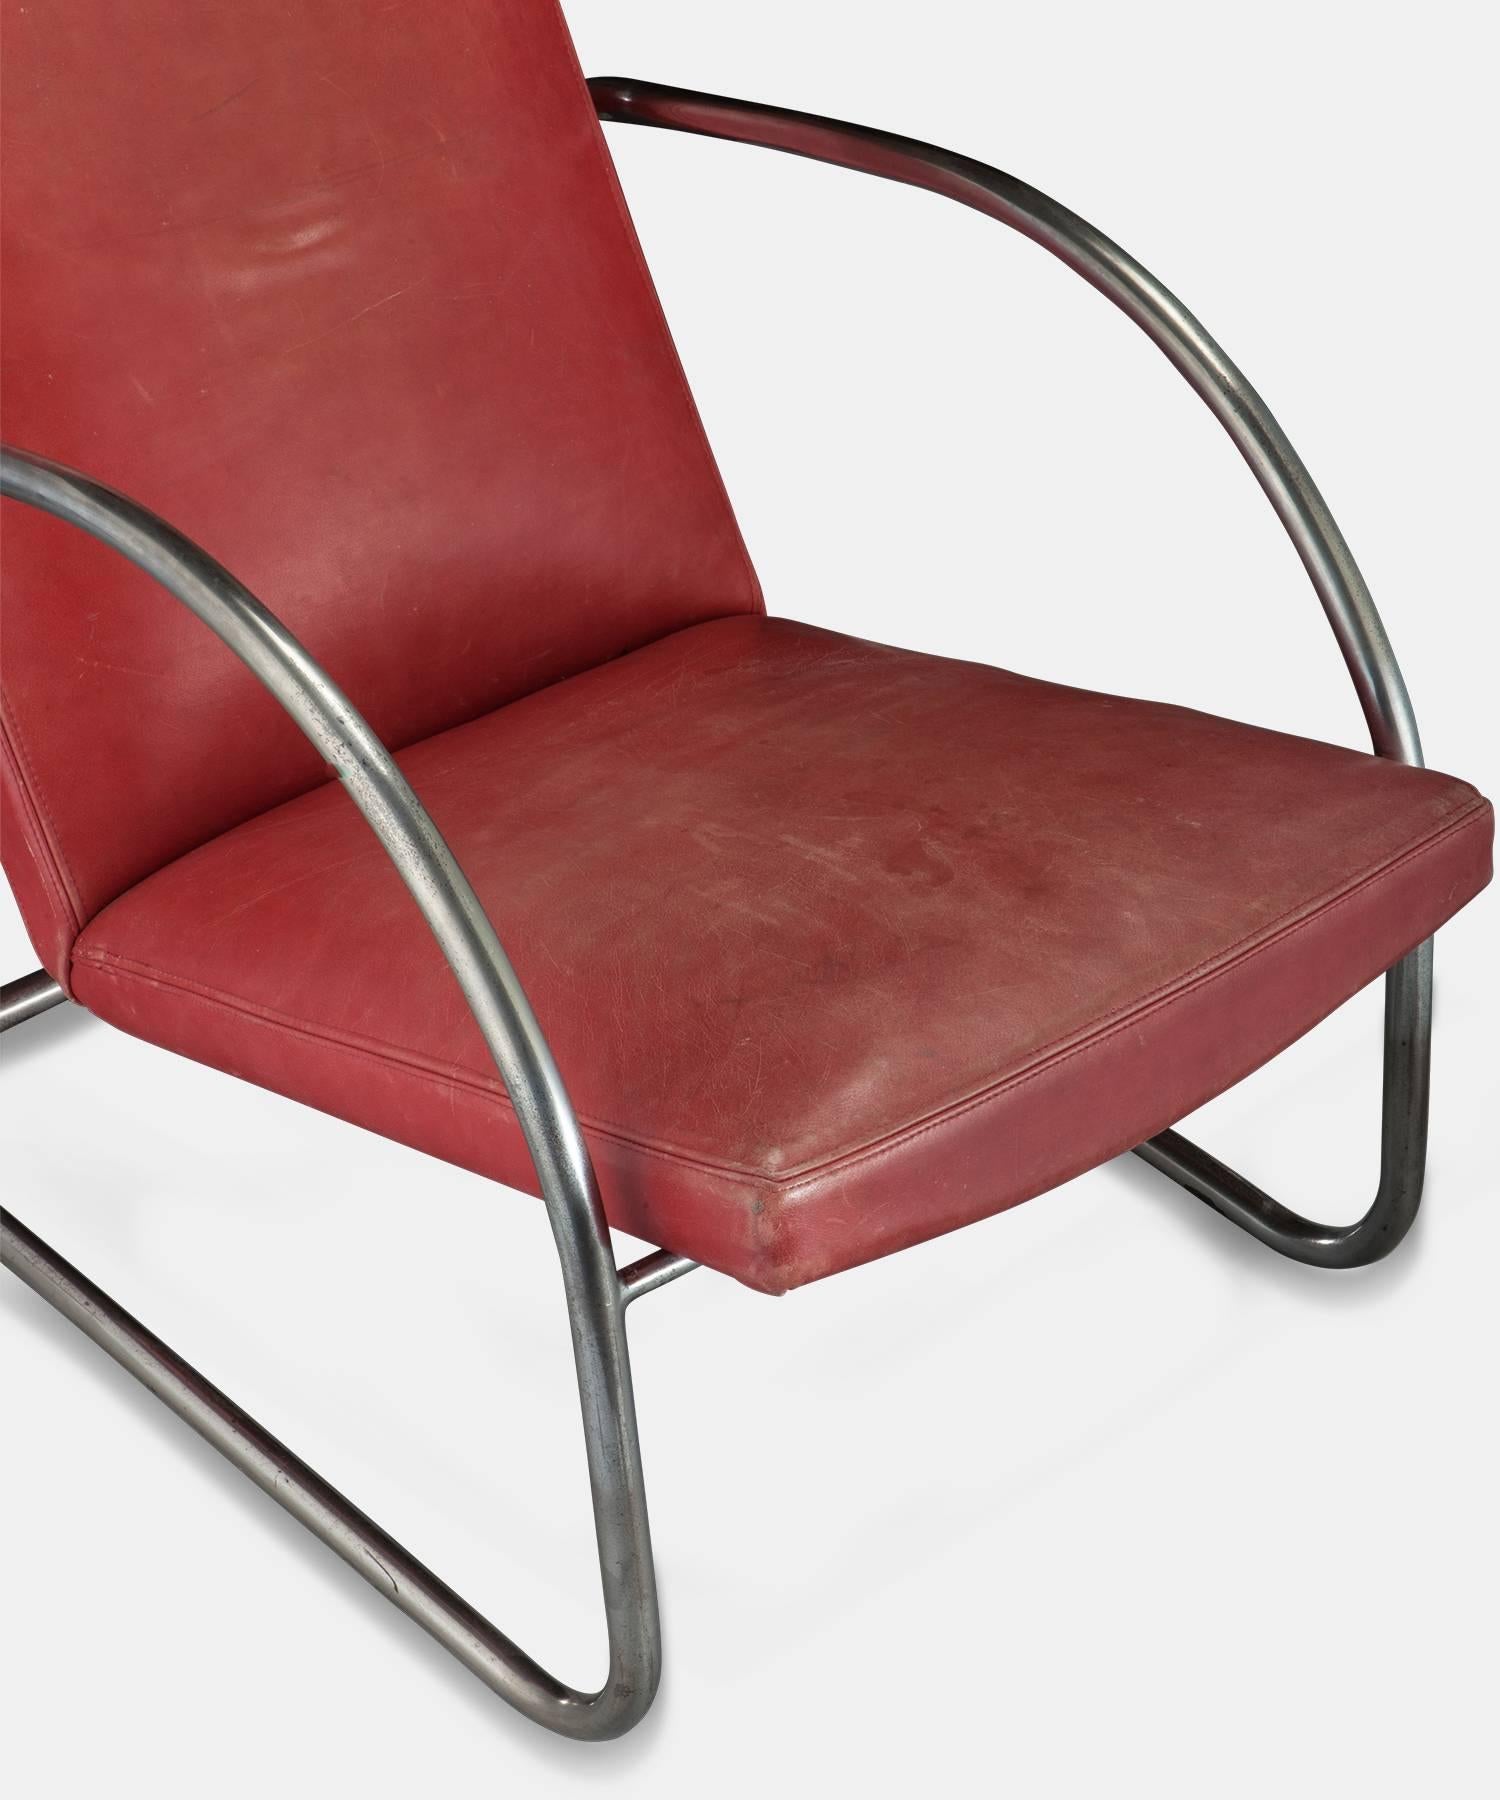 French Chrome and Red Leather Lounge Chair, France, circa 1950